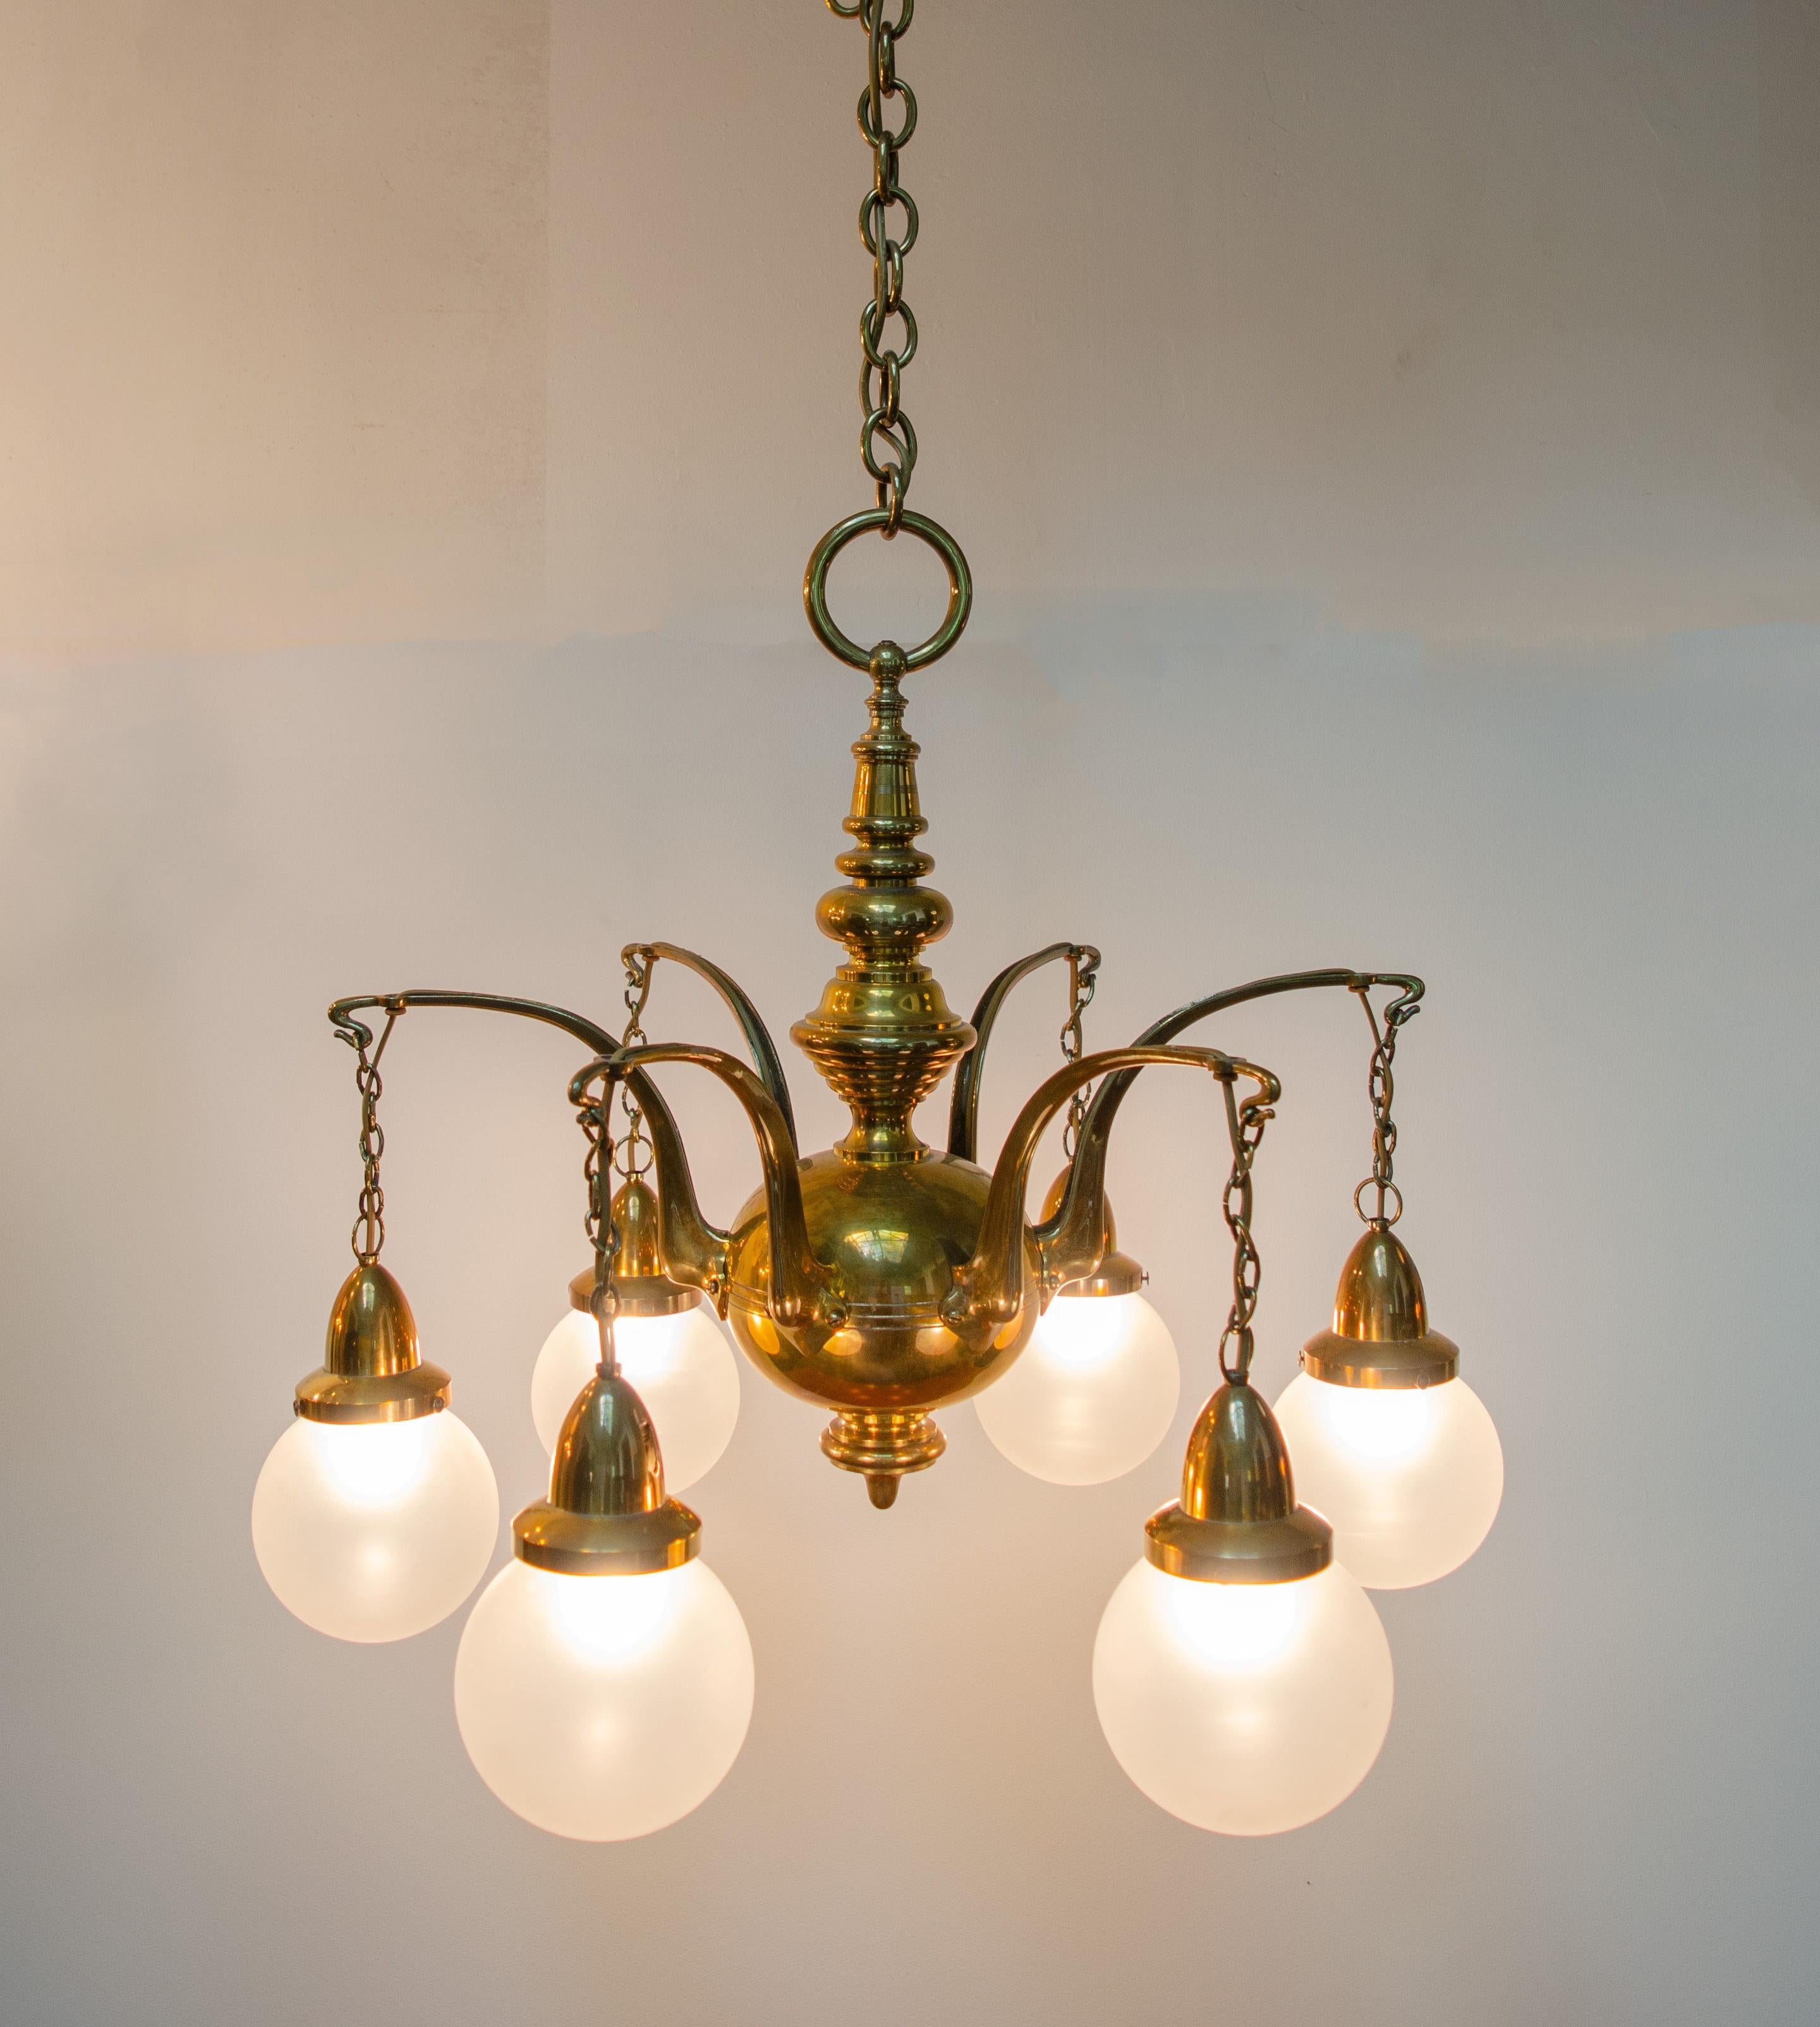 This six-arm Art Deco ceiling chandelier made of brass dates from around 1930. The six arms have lampshades made of opal matt spherical glass. The brass chain can be shortened if the room height requires it. The classic, elegant chandelier can be